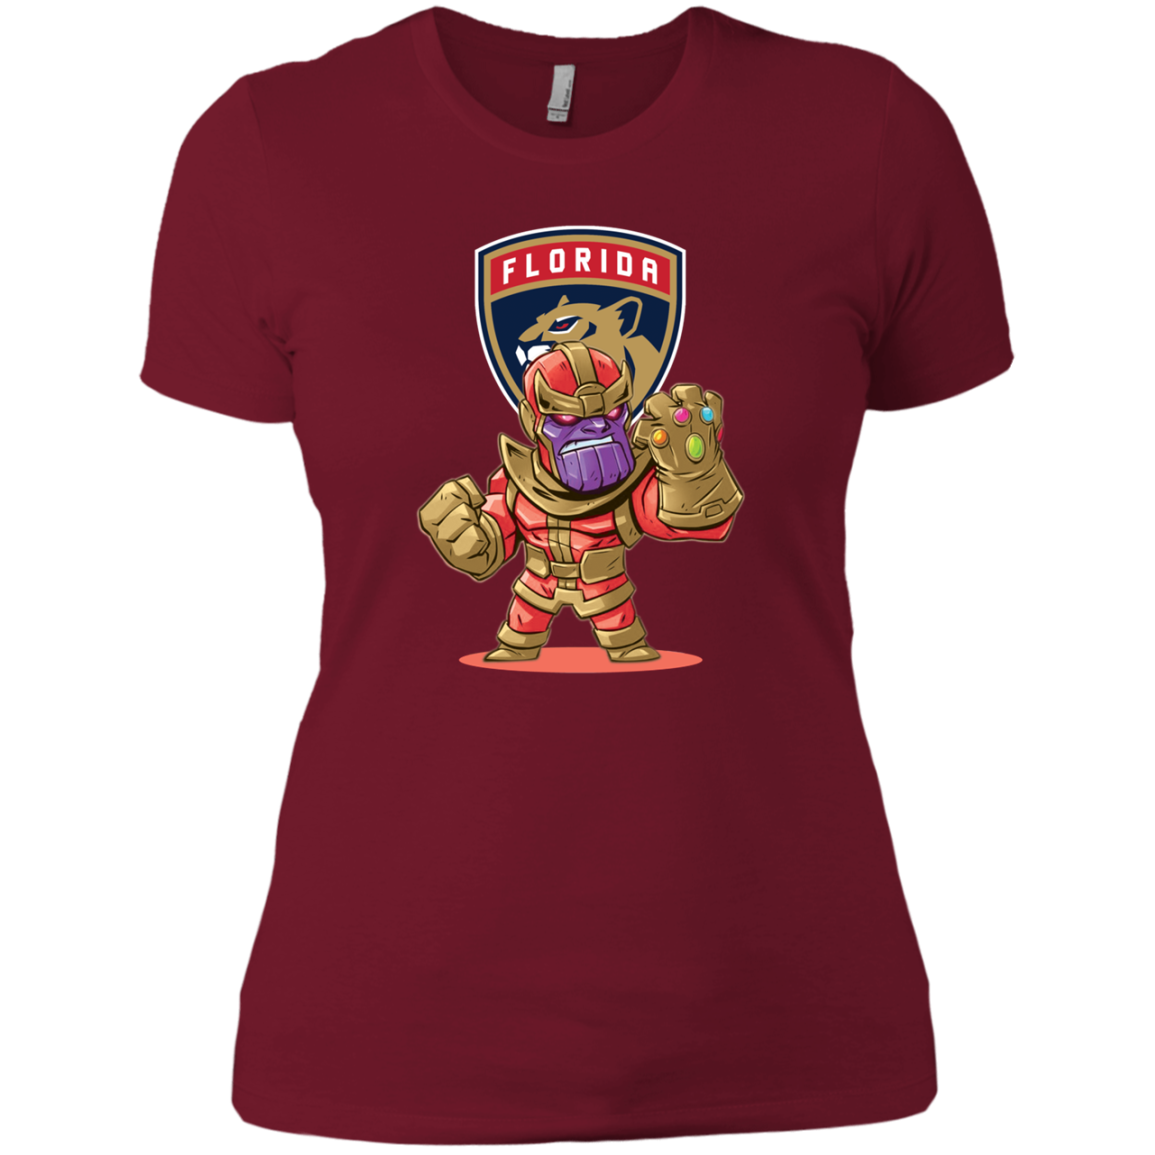 Buy Shirt For Thanos And Florida Panthers Fans